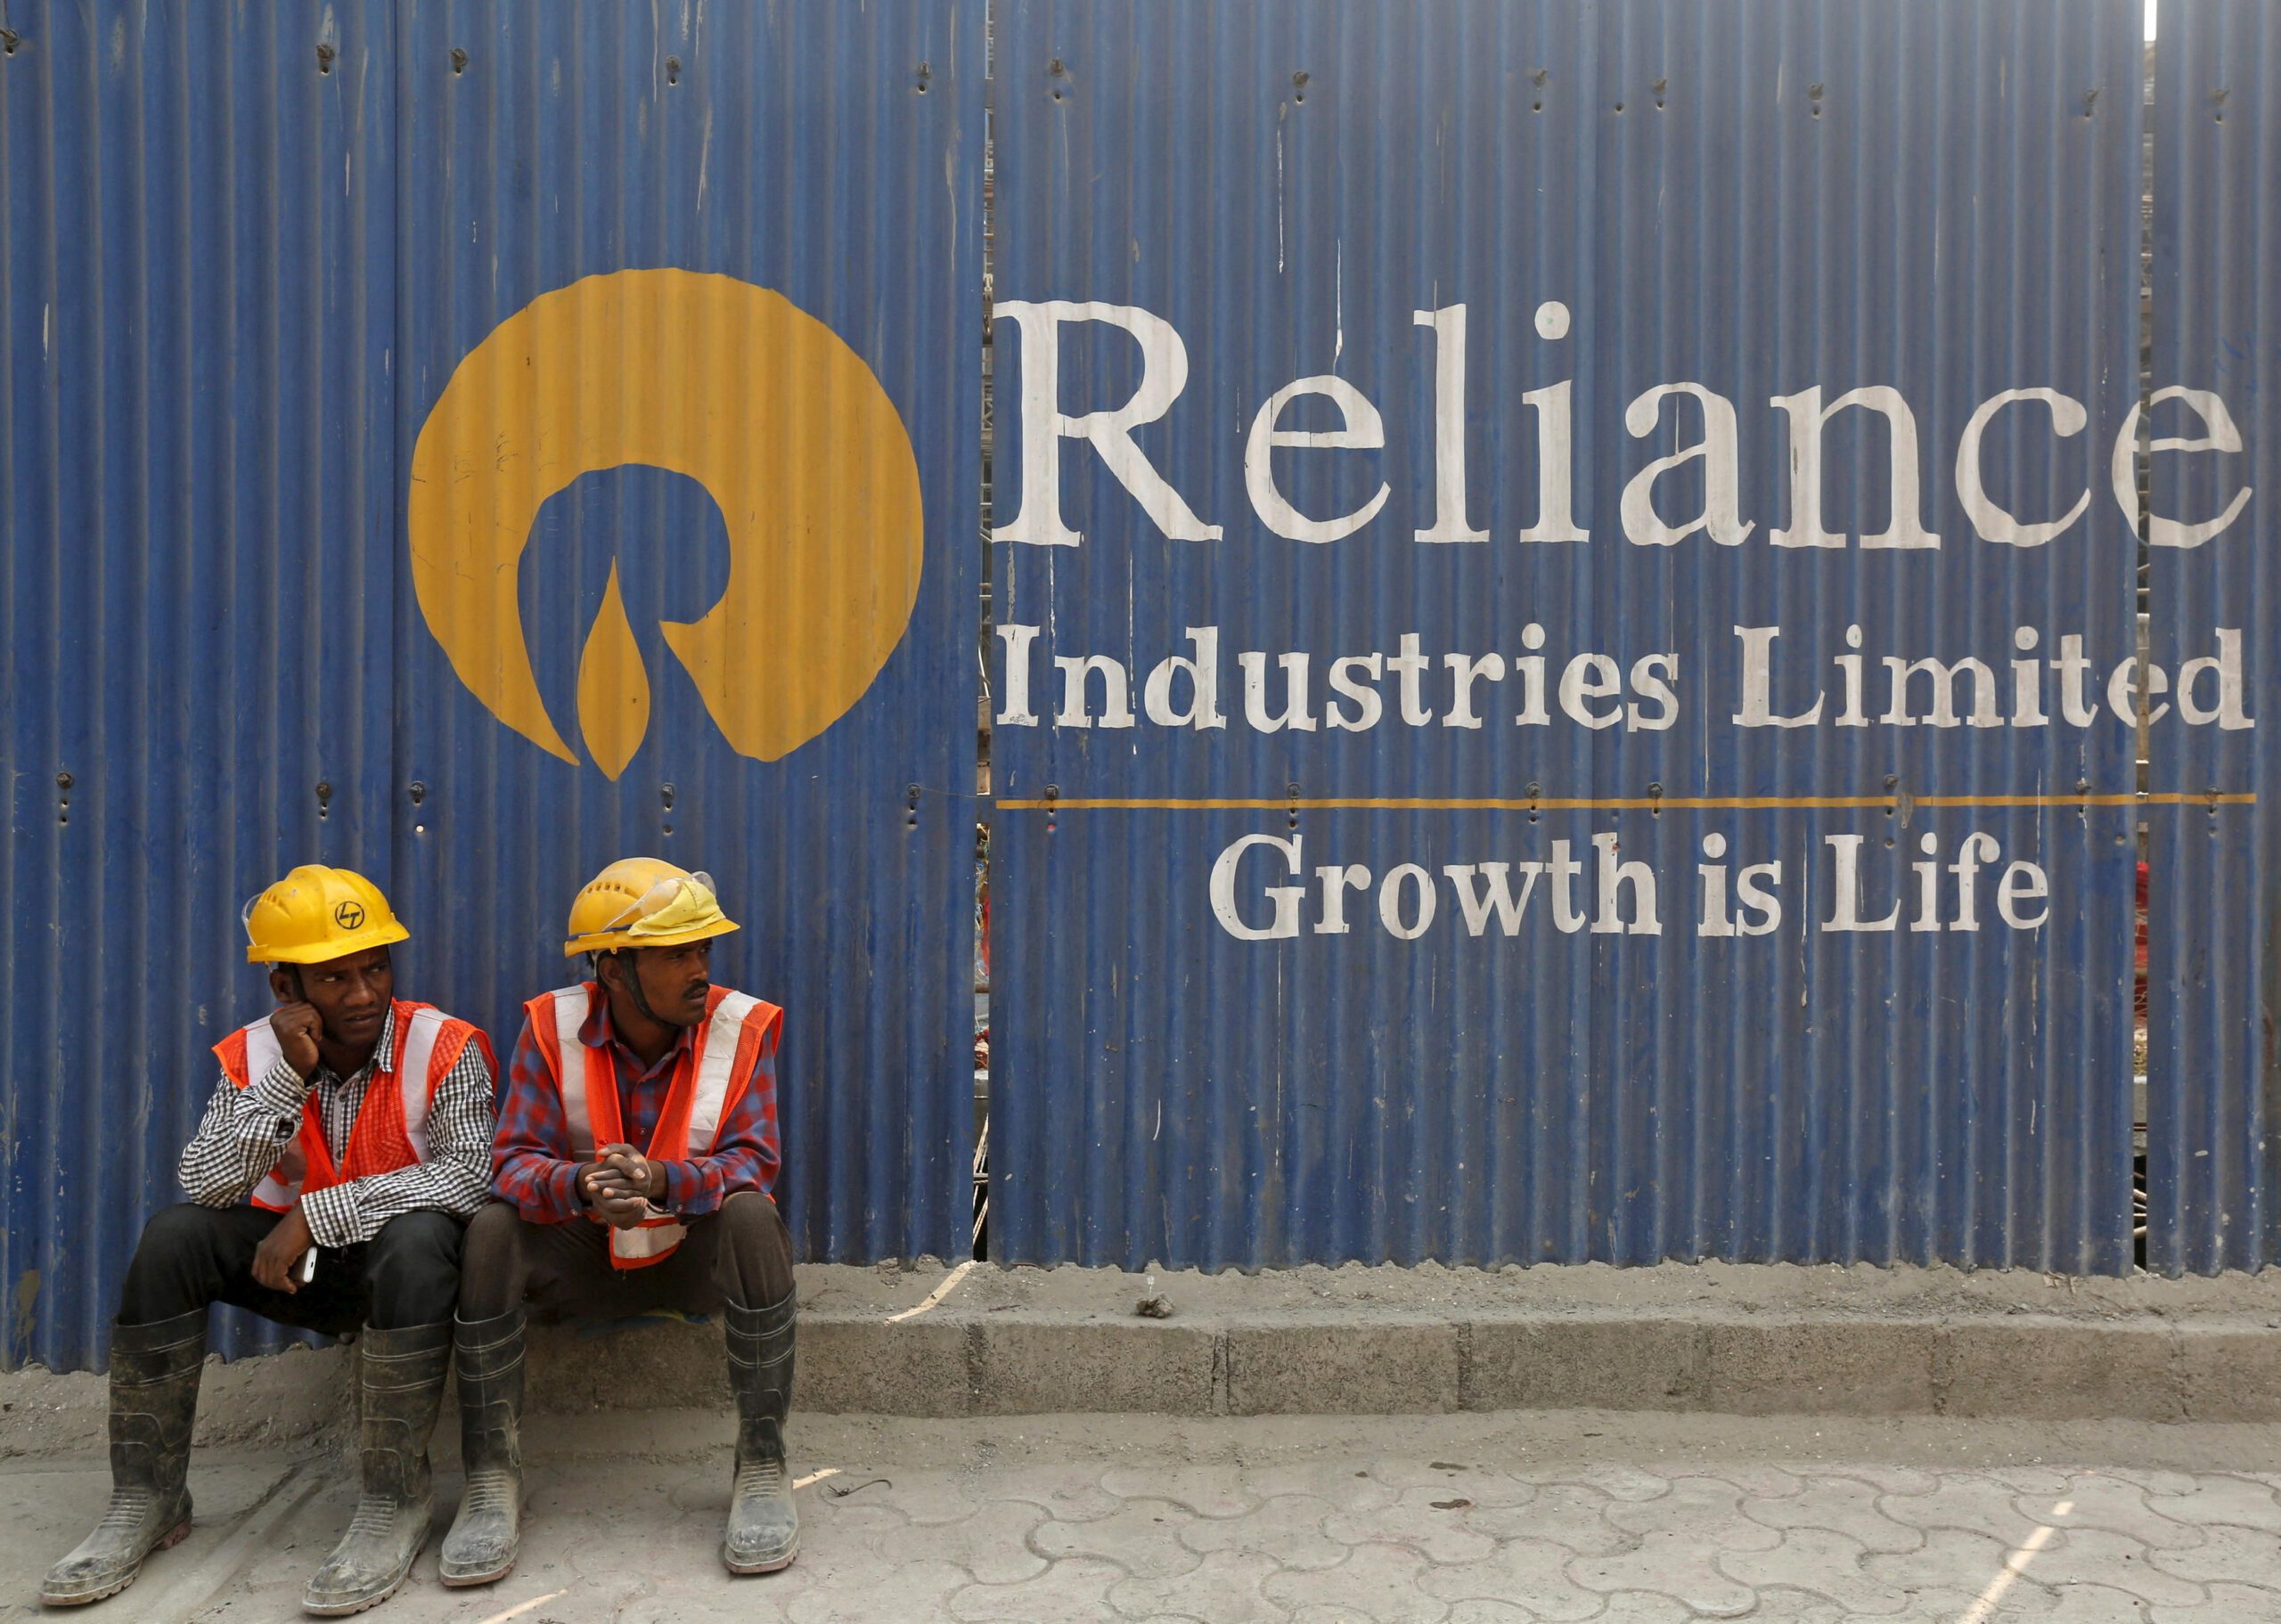 FILE PHOTO: Labourers rest in front of an advertisement for Reliance Industries Limited at a construction site in Mumbai, India, March 2, 2016. REUTERS/Shailesh Andrade/File Photo